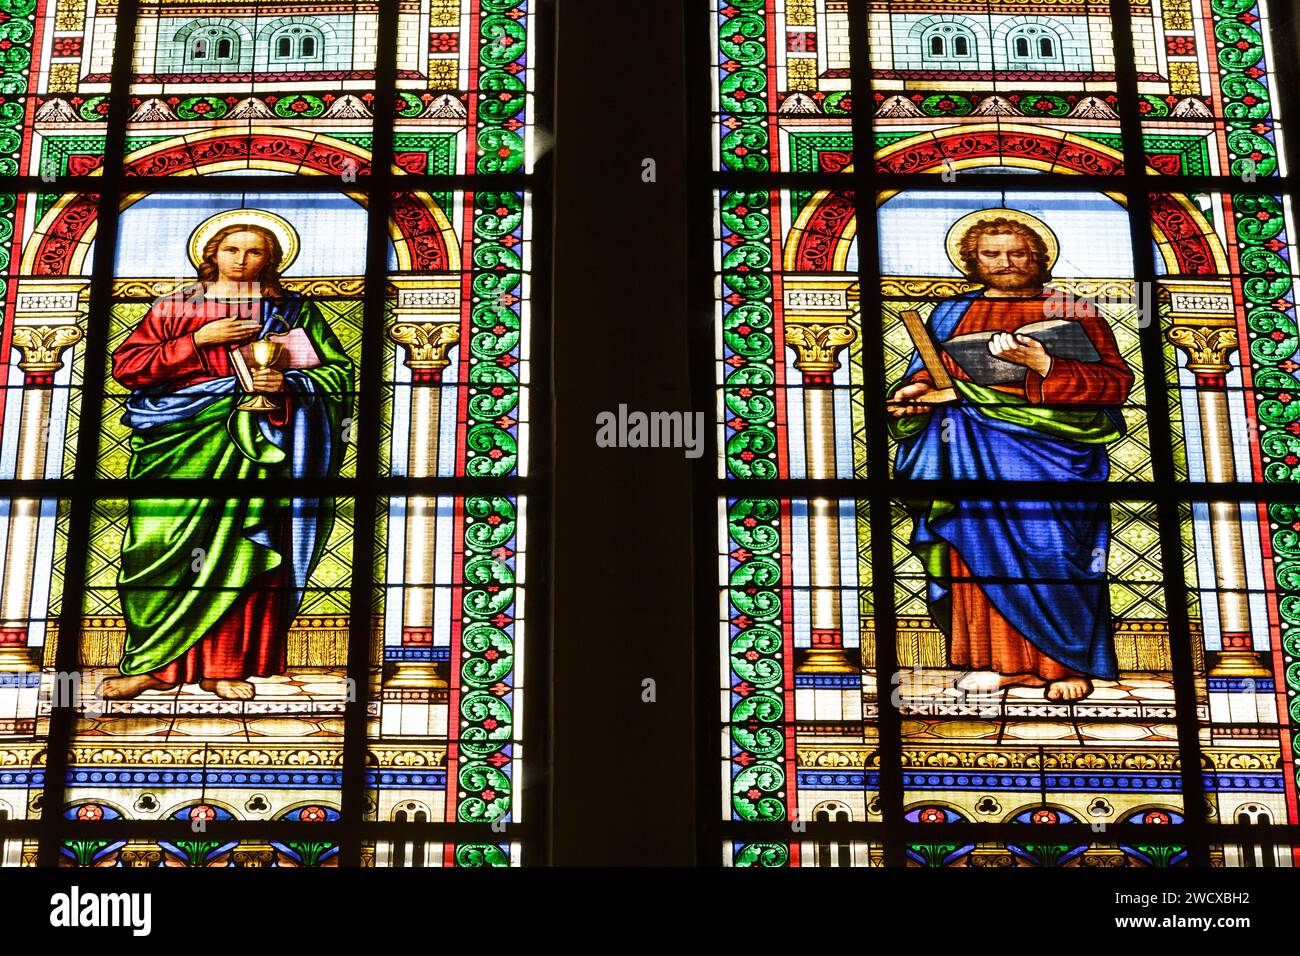 France, Meurthe et Moselle, Nancy, Saint Mansuy church built between 1878 and 1881 by architect Emile Jacquemin after the plans of his father Claude Jacquemin in neo romanesque style, stained glass window made by A. D. Issi a workshop in Munich which represents on the left Saint Jean the Evangelist with a chalice and a snake coming out from it, on the right Saint Thomas with a book and a square as patron saint of the architects, bricklayers, surveyors, stone masons, located Avenue de la LIberation Stock Photo